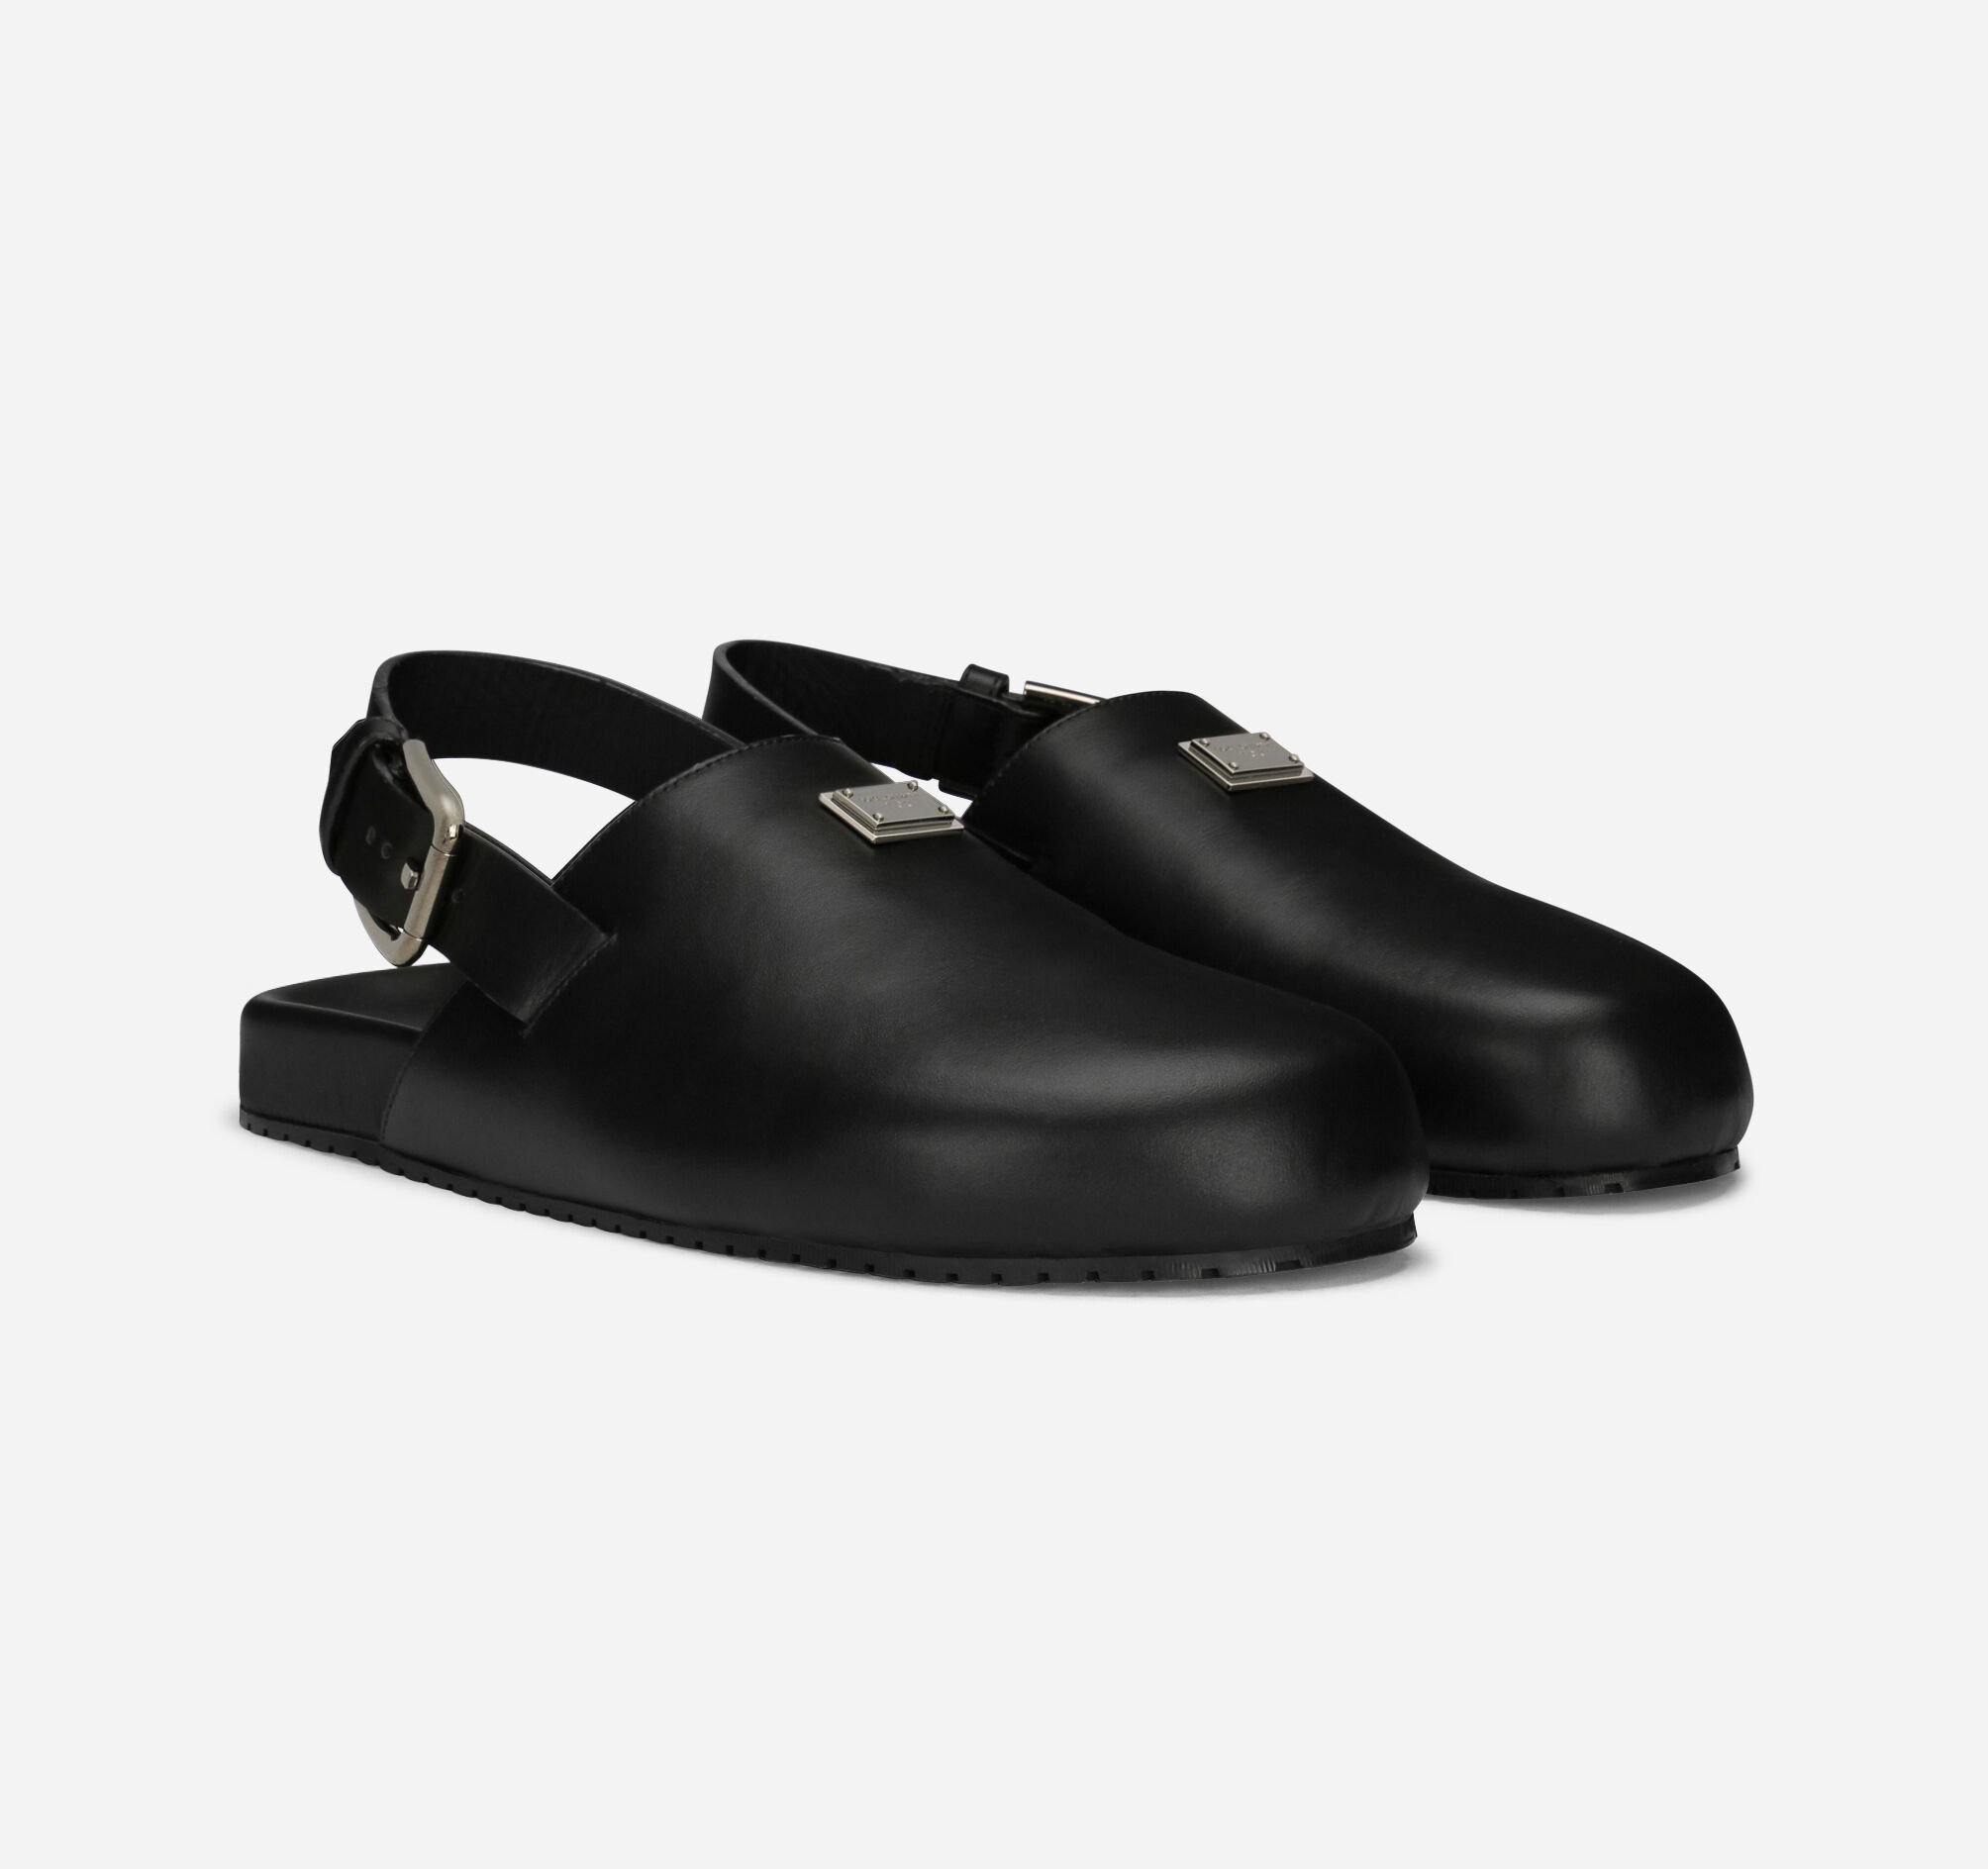 D&G slippers and sandals restocked... - Marmockcollection | Facebook